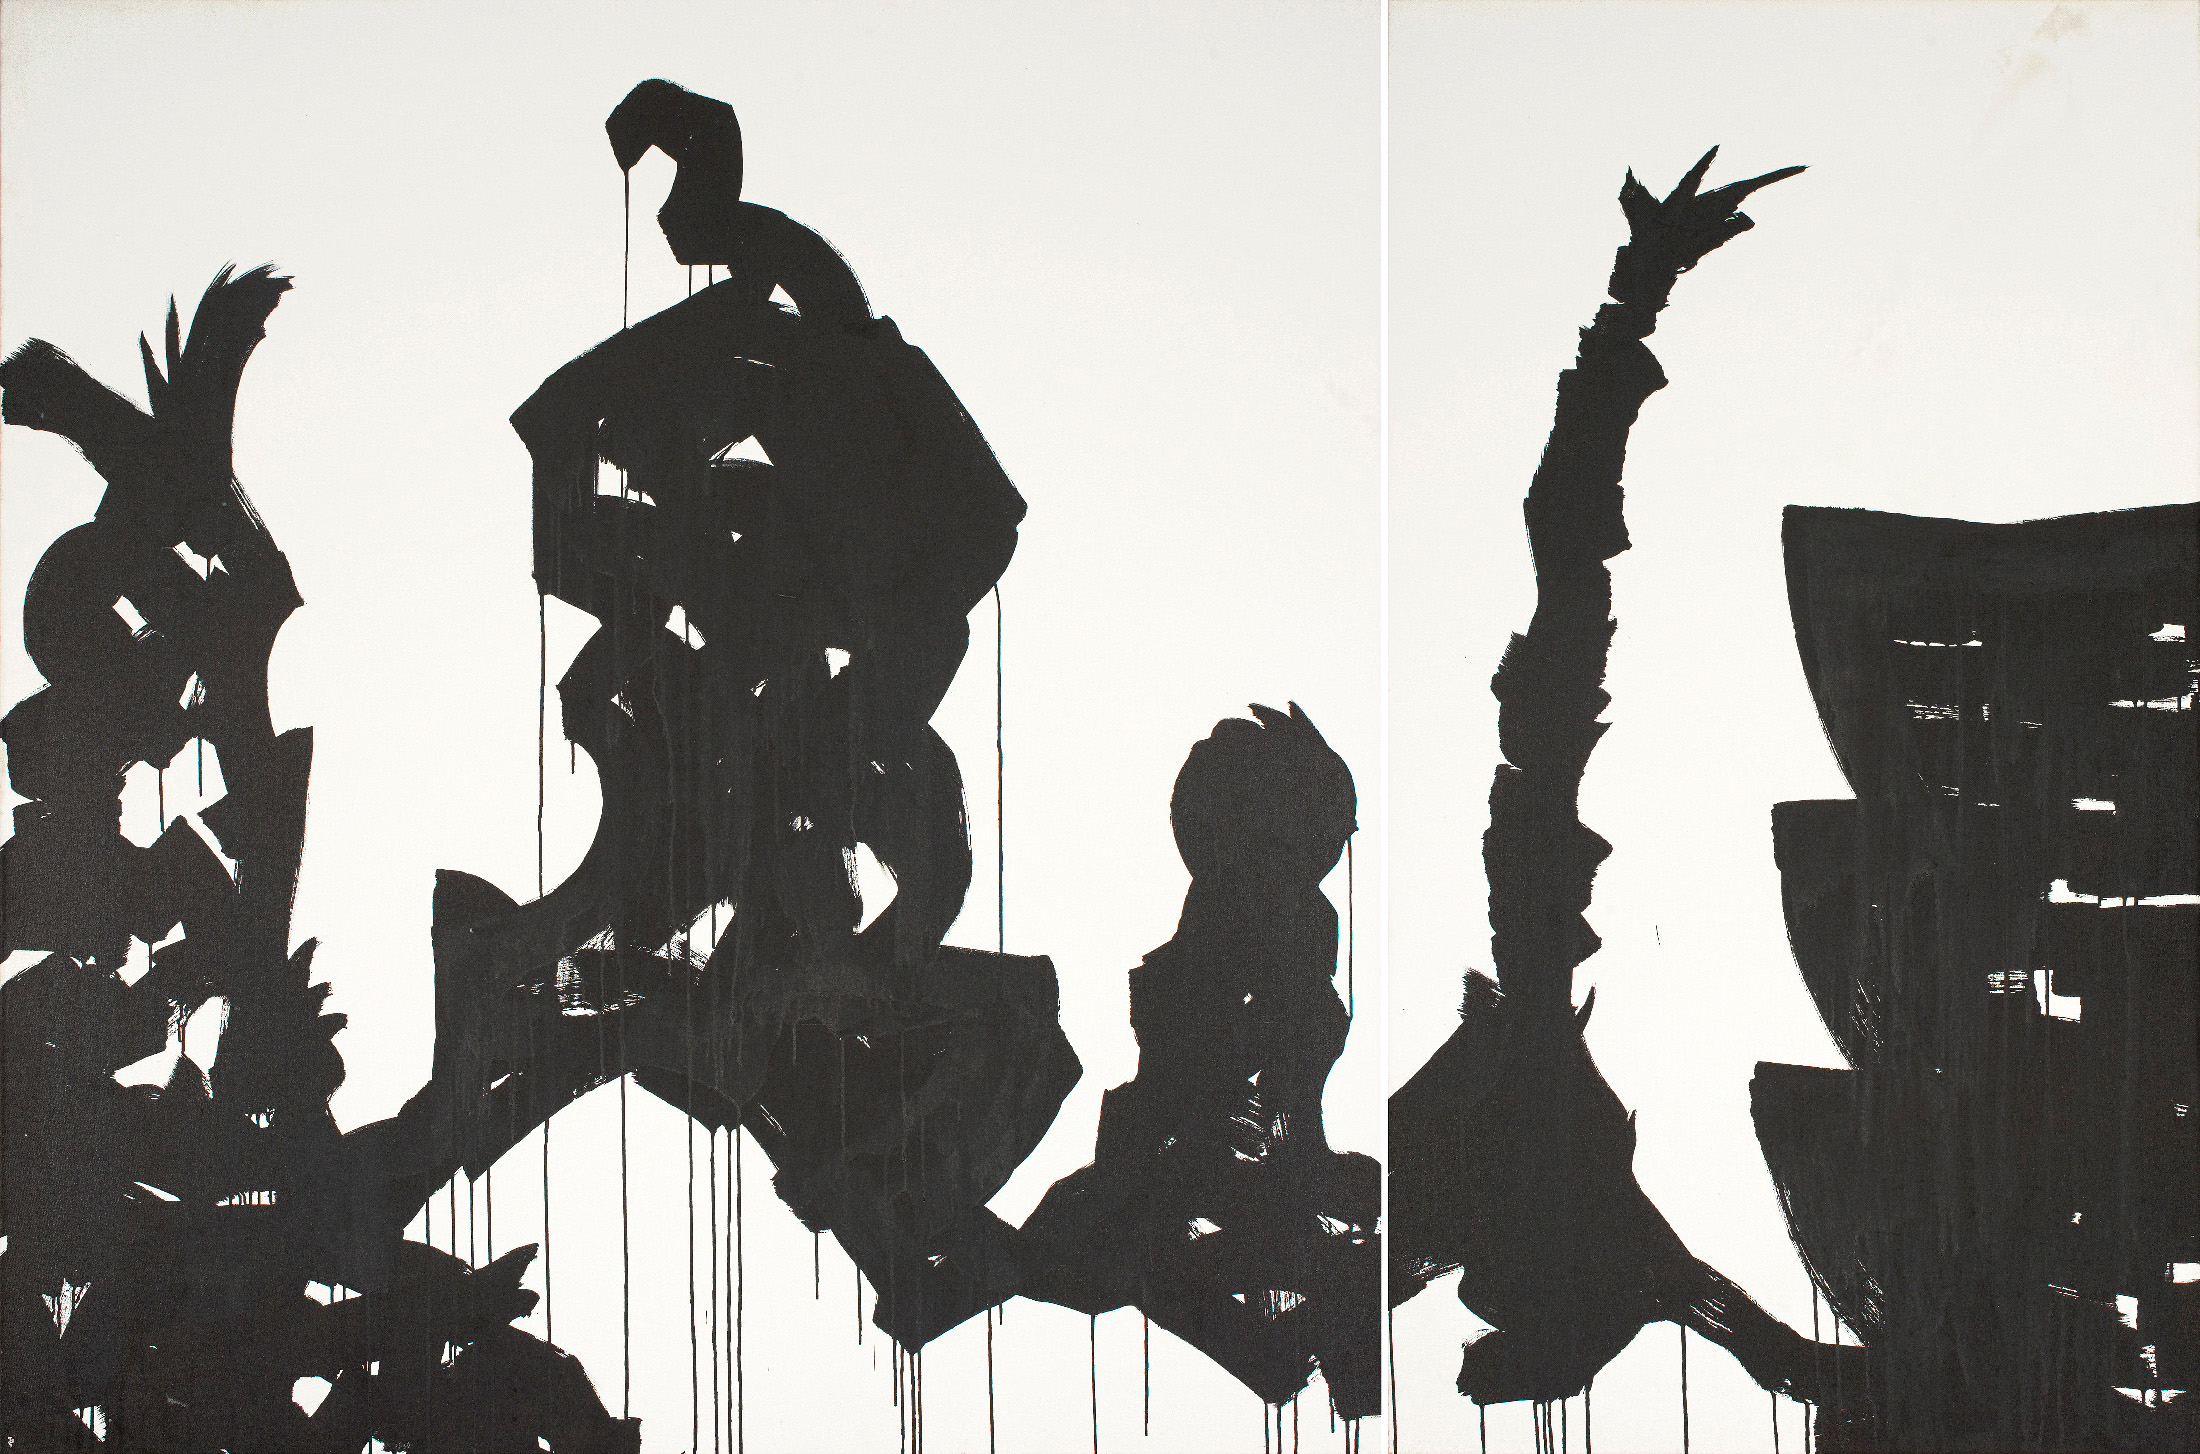 Marcus Neustetter; Shadow Scape - Smithsonian National Museum of African Art I - III, diptych